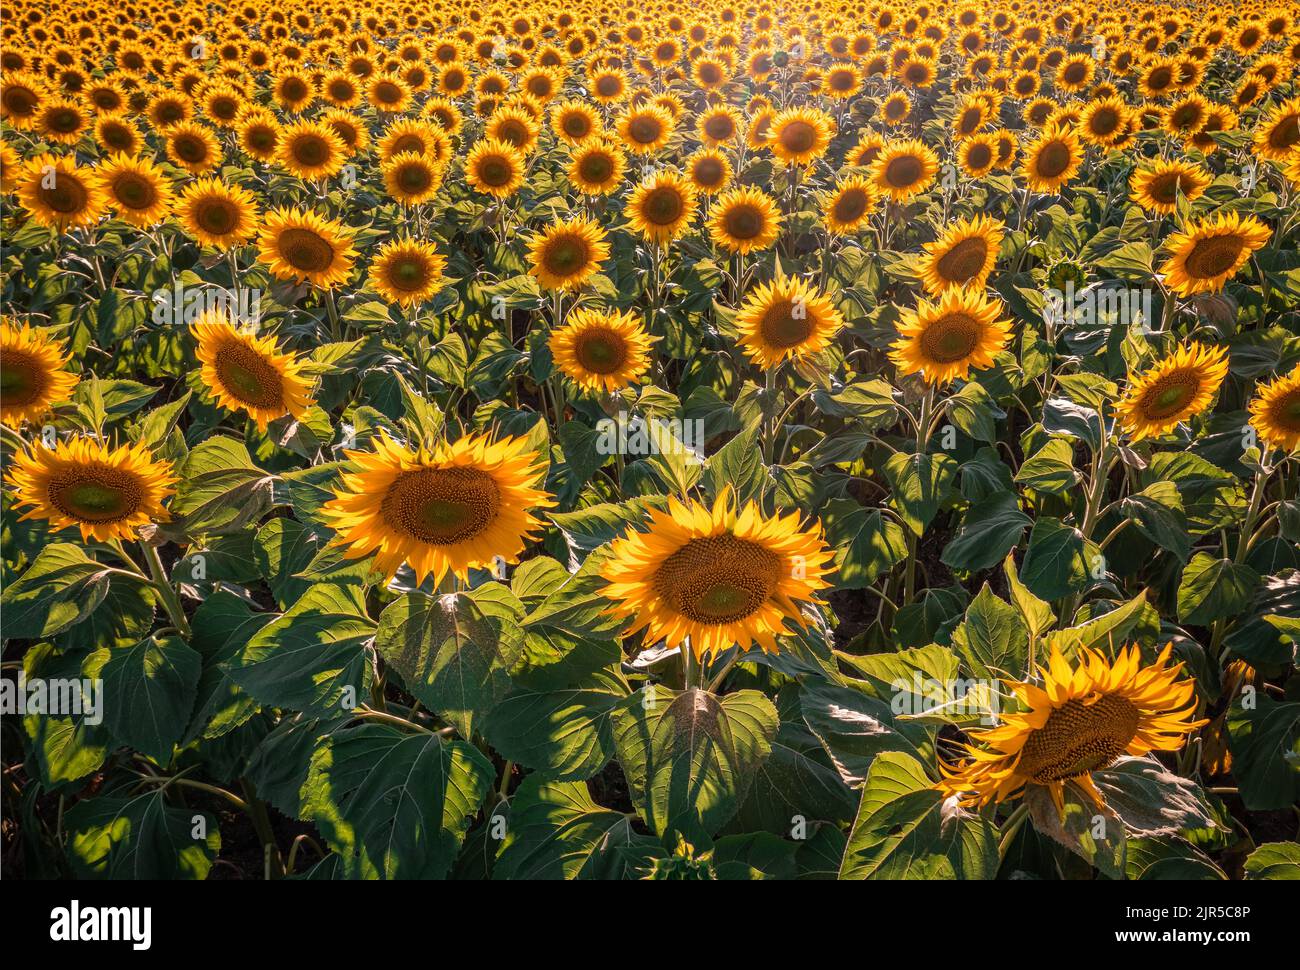 Balatonfuzfo, Hungary - Aerial drone view of a beautiful warm coloured sunflower field at sunset near Lake Balaton at summertime. Agricultural backgro Stock Photo